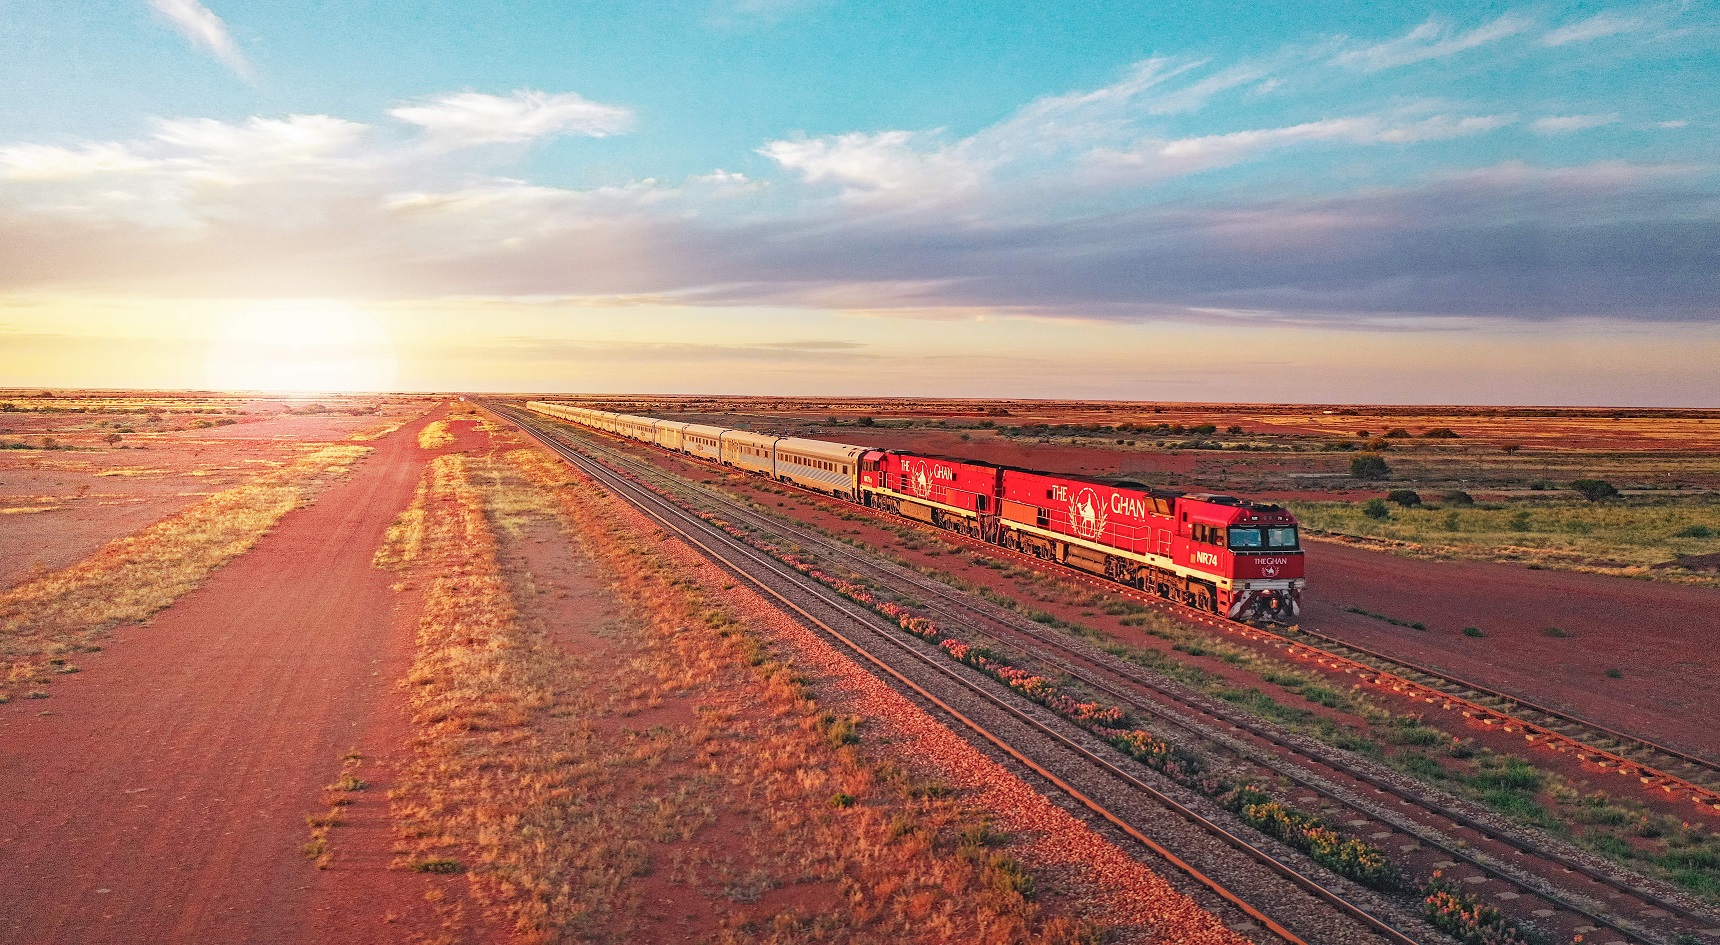 The Ghan travelling in the outback with the sun in the distance.